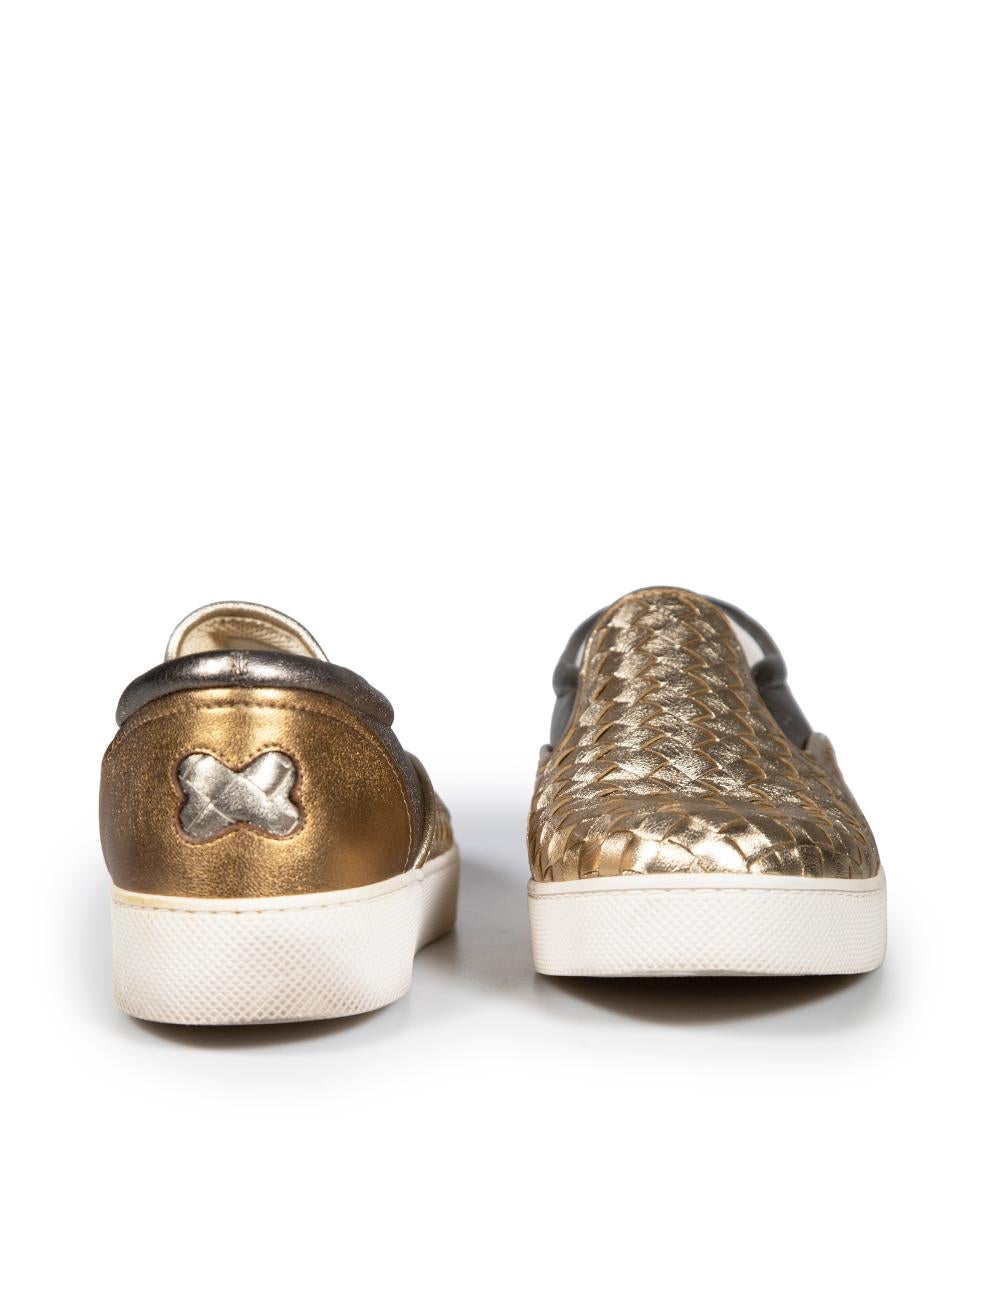 Bottega Veneta Gold Leather Slip On Trainers Size IT 40.5 In Good Condition For Sale In London, GB